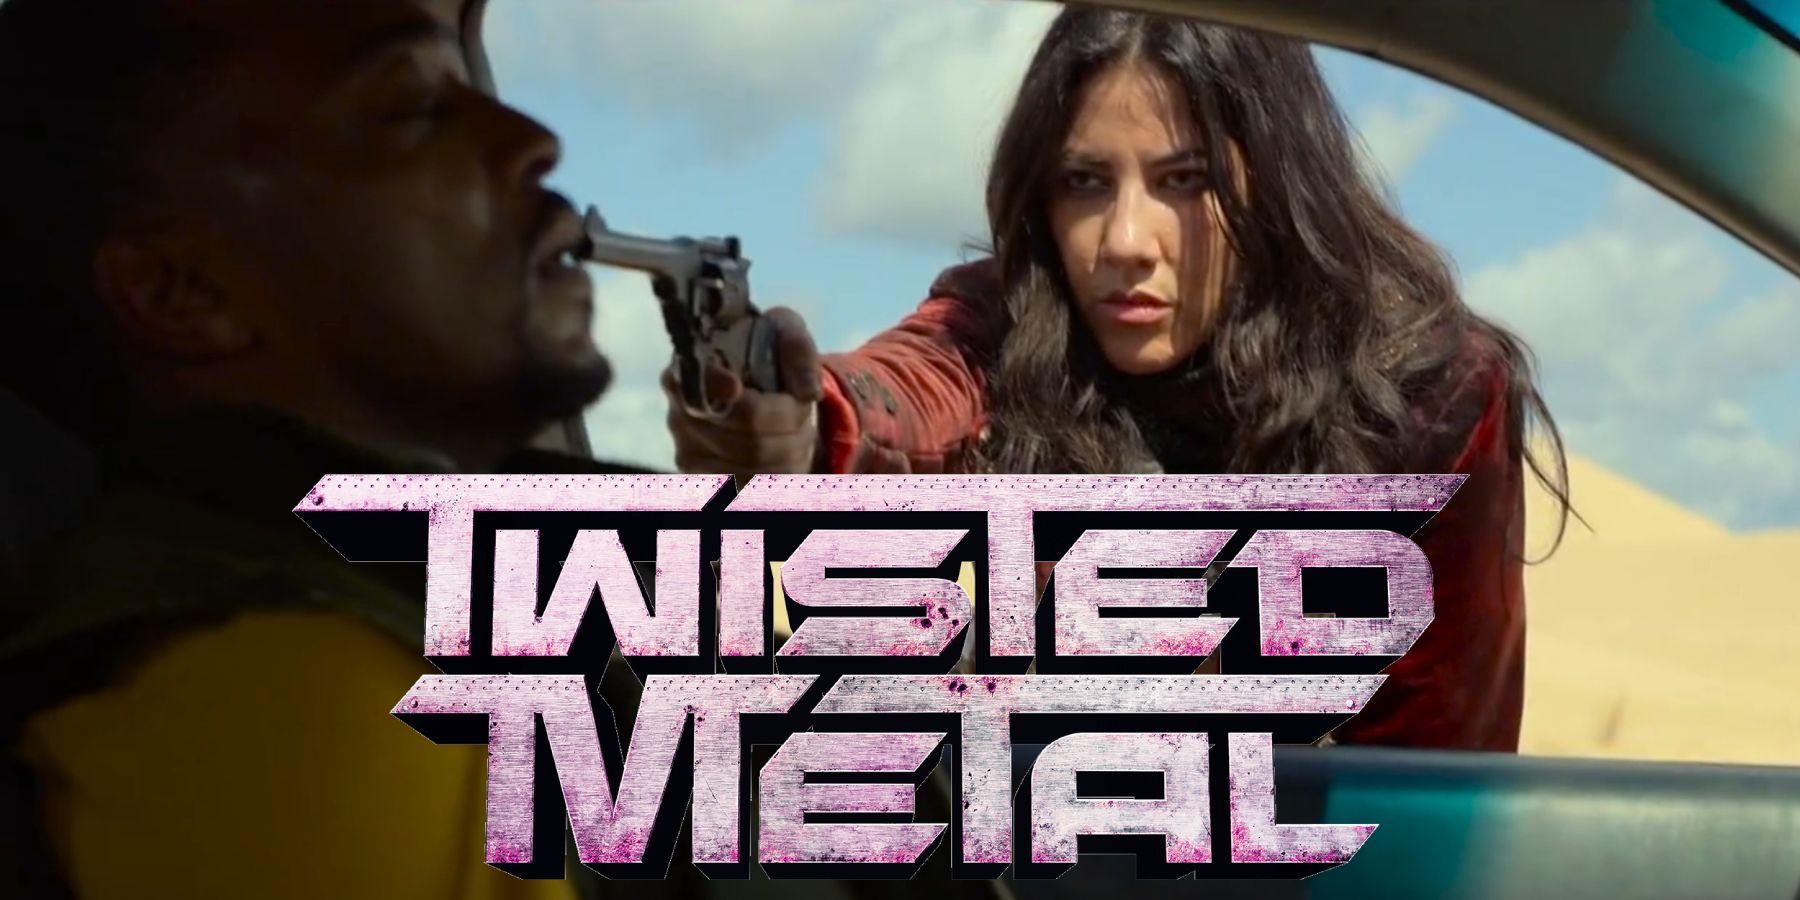 Stephanie Beatriz as Quiet and Anthony Mackie as John Doe on the Peacock series Twisted Metal